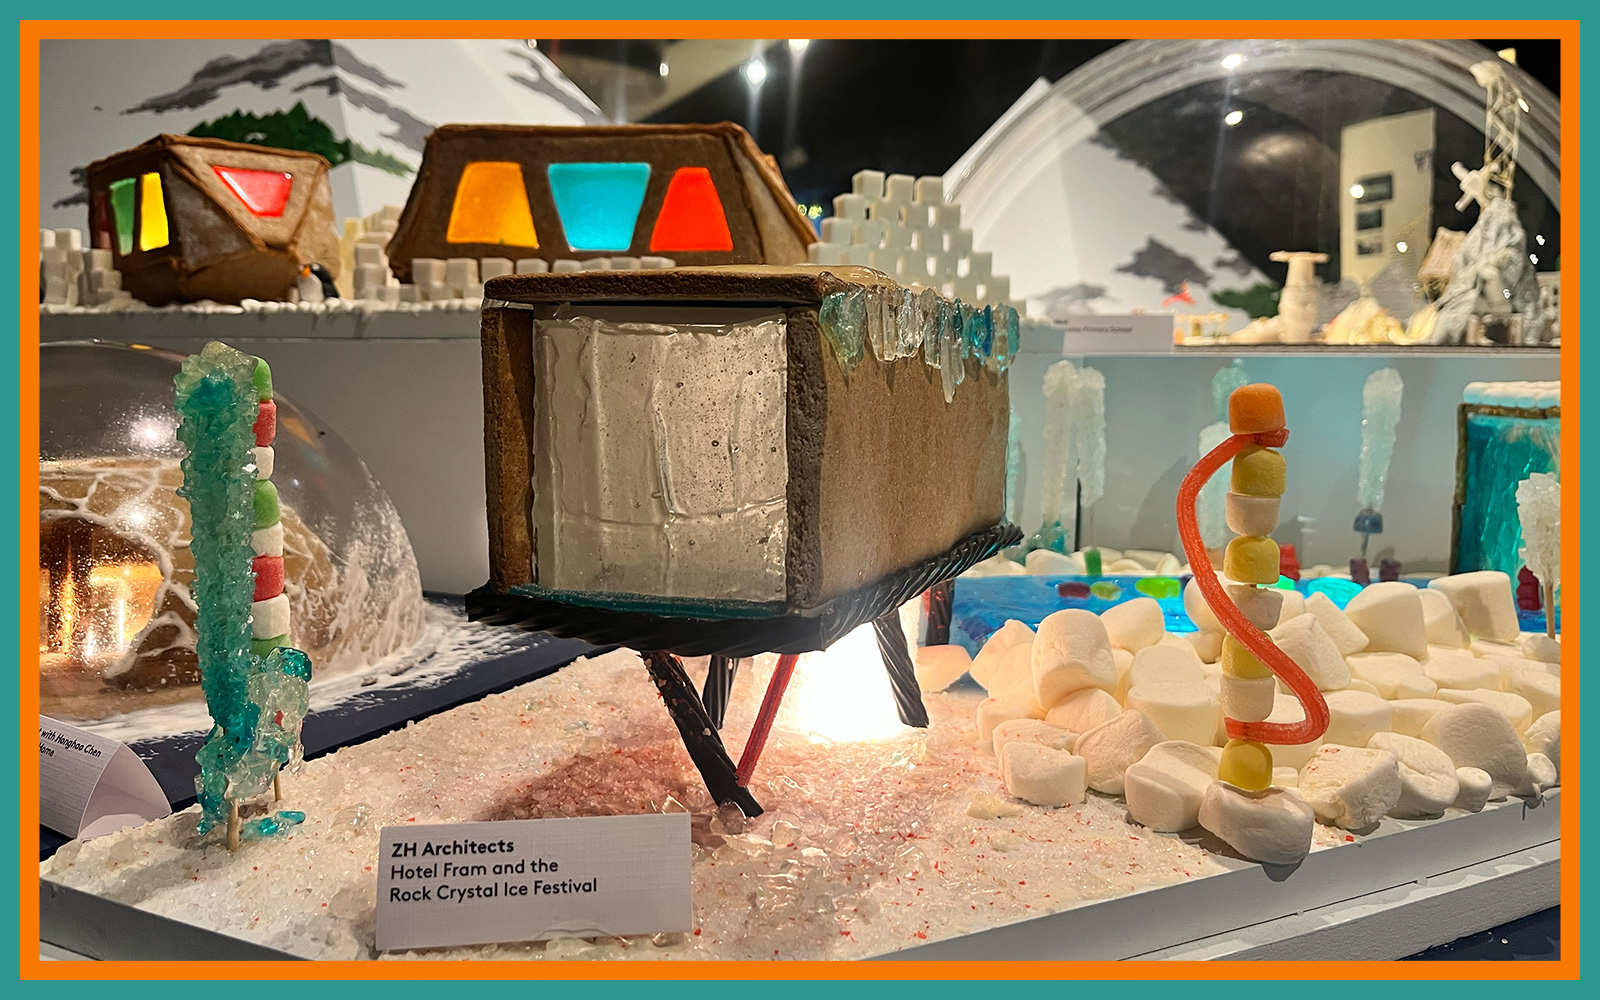 NYC Architects Take On Gingerbread at Inaugural Exhibit